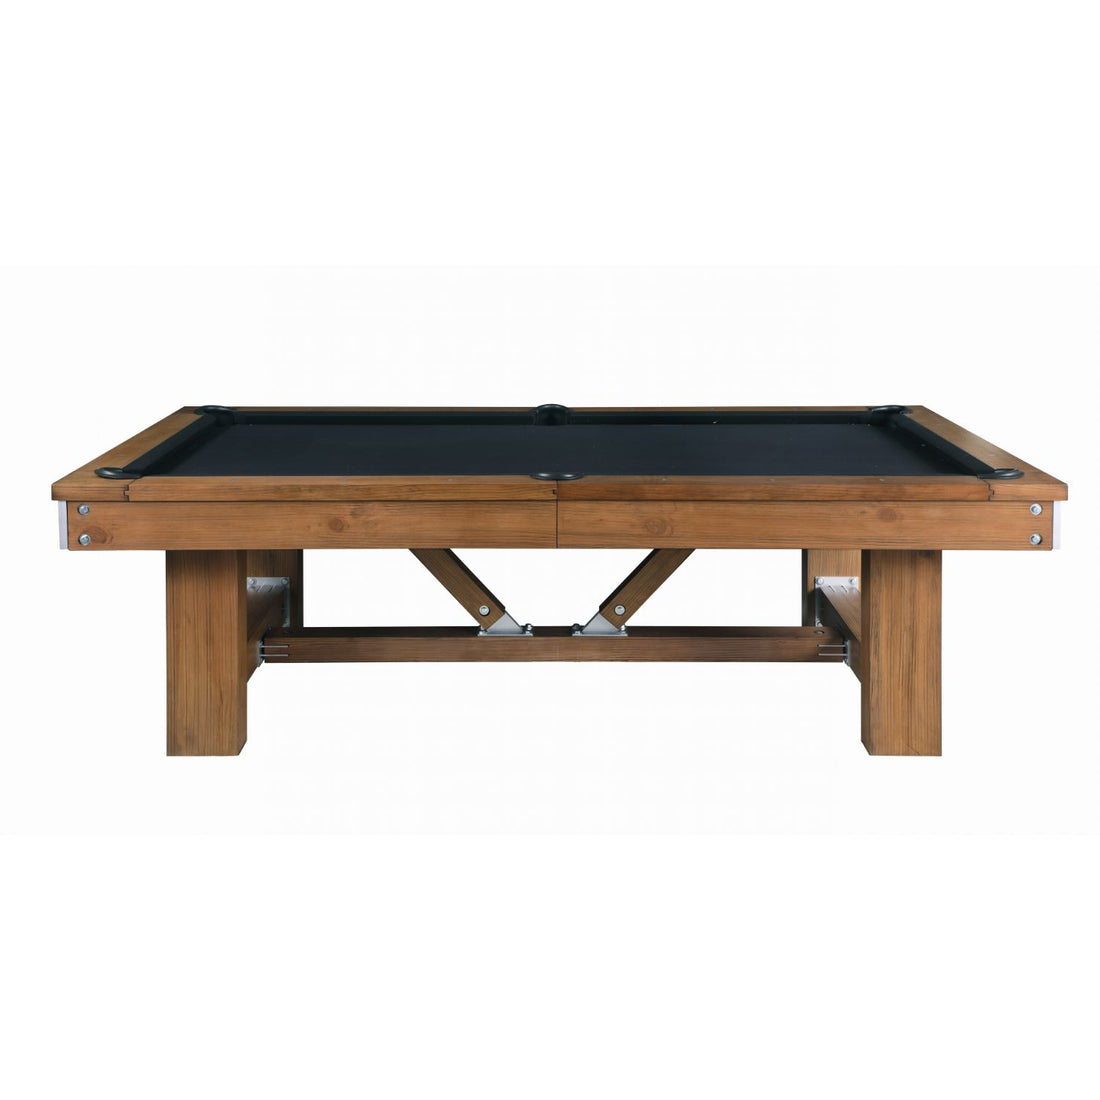 Buy Playcraft Willow Bend Slate Pool Table with Free Shipping – Gaming ...